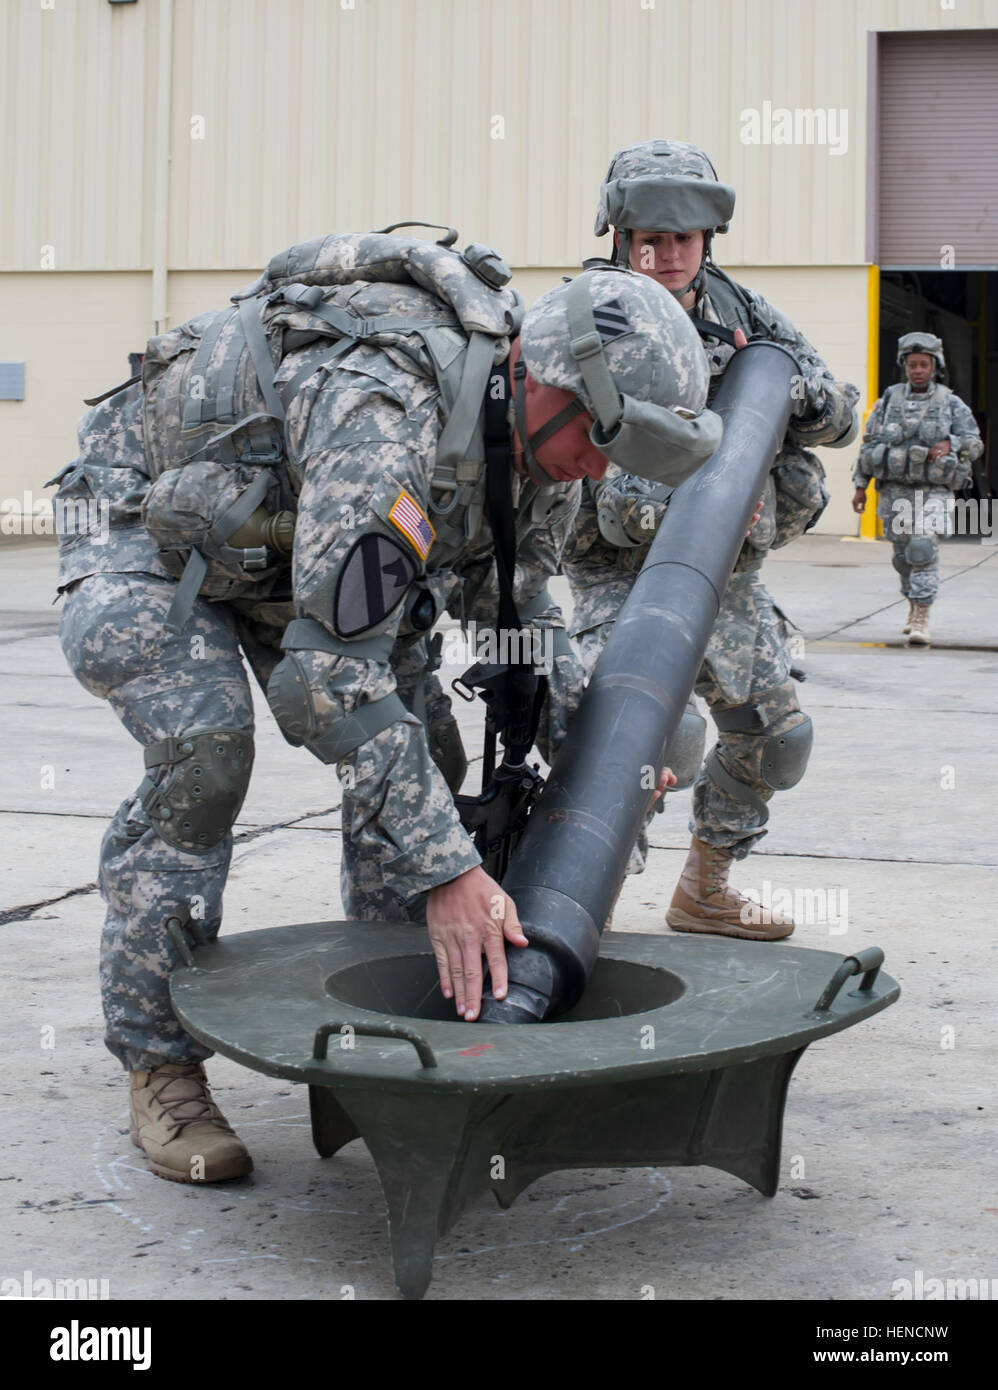 Spc. Koty Roby (left) and Spc. Rachel Wickline (right), both assigned to the Physical Demands Study, Mortarman Platoon, Company D “Dragons,” 1st Battalion, 30th Infantry Regiment “Battle Boars,” 2nd Armored Brigade Combat Team, 3rd Infantry Division, quickly place a mortar tube on a base plate after running the base plate and then the tube 16.5 yards here at the Battle Boars’ motor pool, March 12. This task is just one part of the PDS that the Dragons have been spearheading for the 2nd ABCT, in conjunction with U.S. Army Training and Doctrine Command, and the U.S. Army Research Institute of En Stock Photo